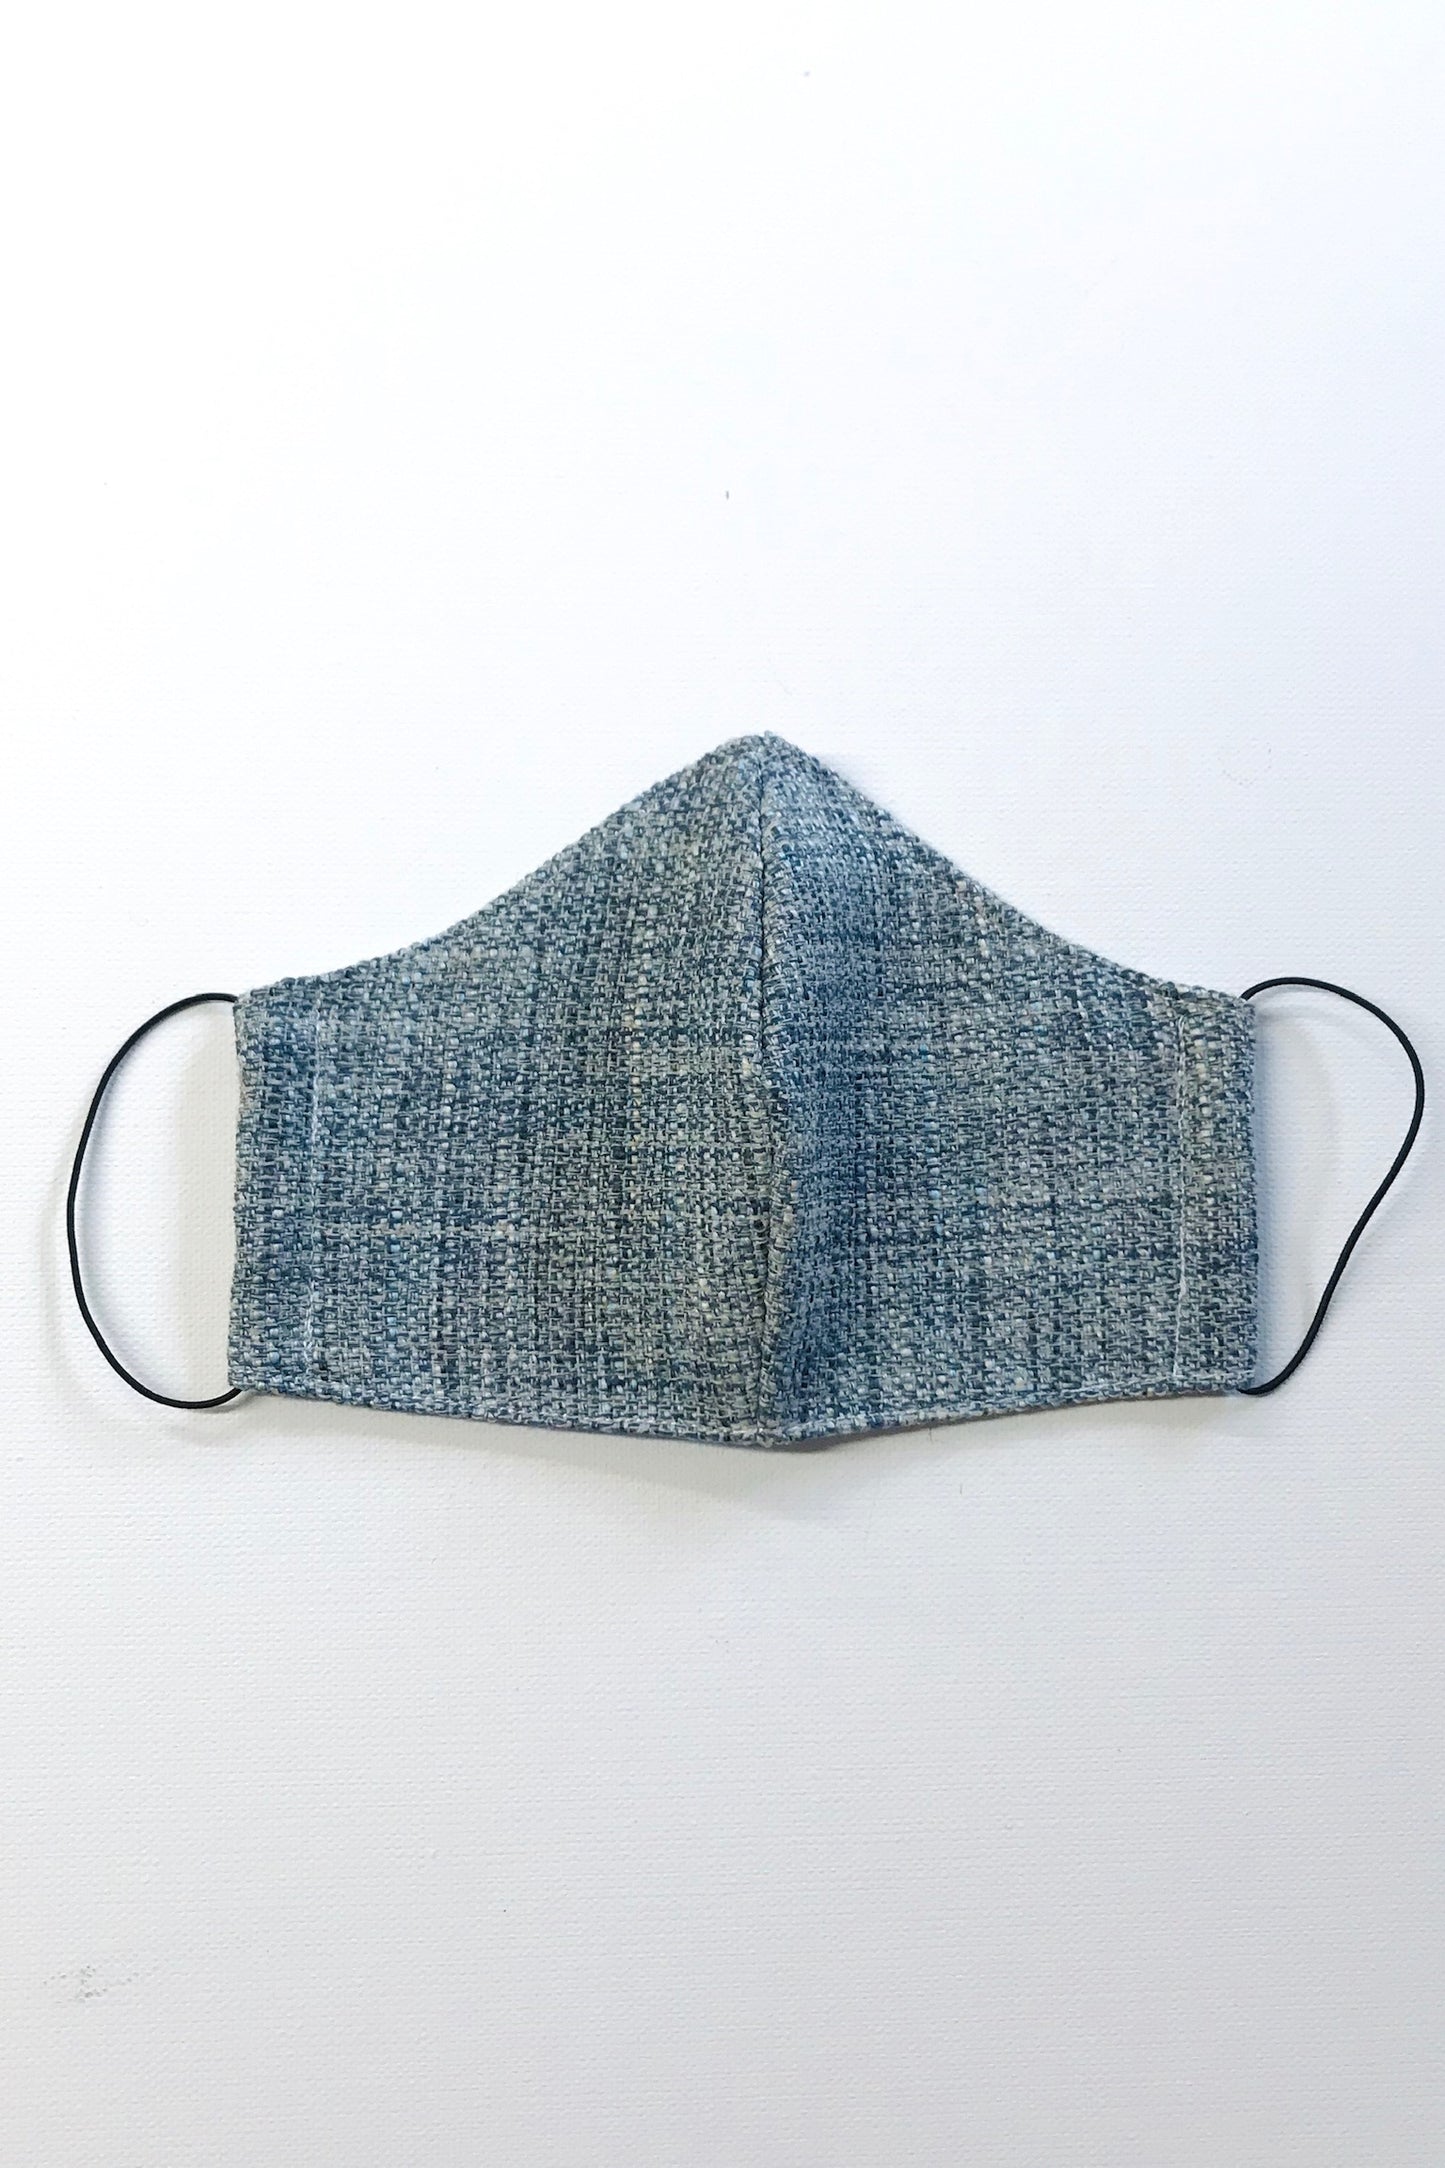 Adult Fabric Face Mask - Linen Tweed (Blue)